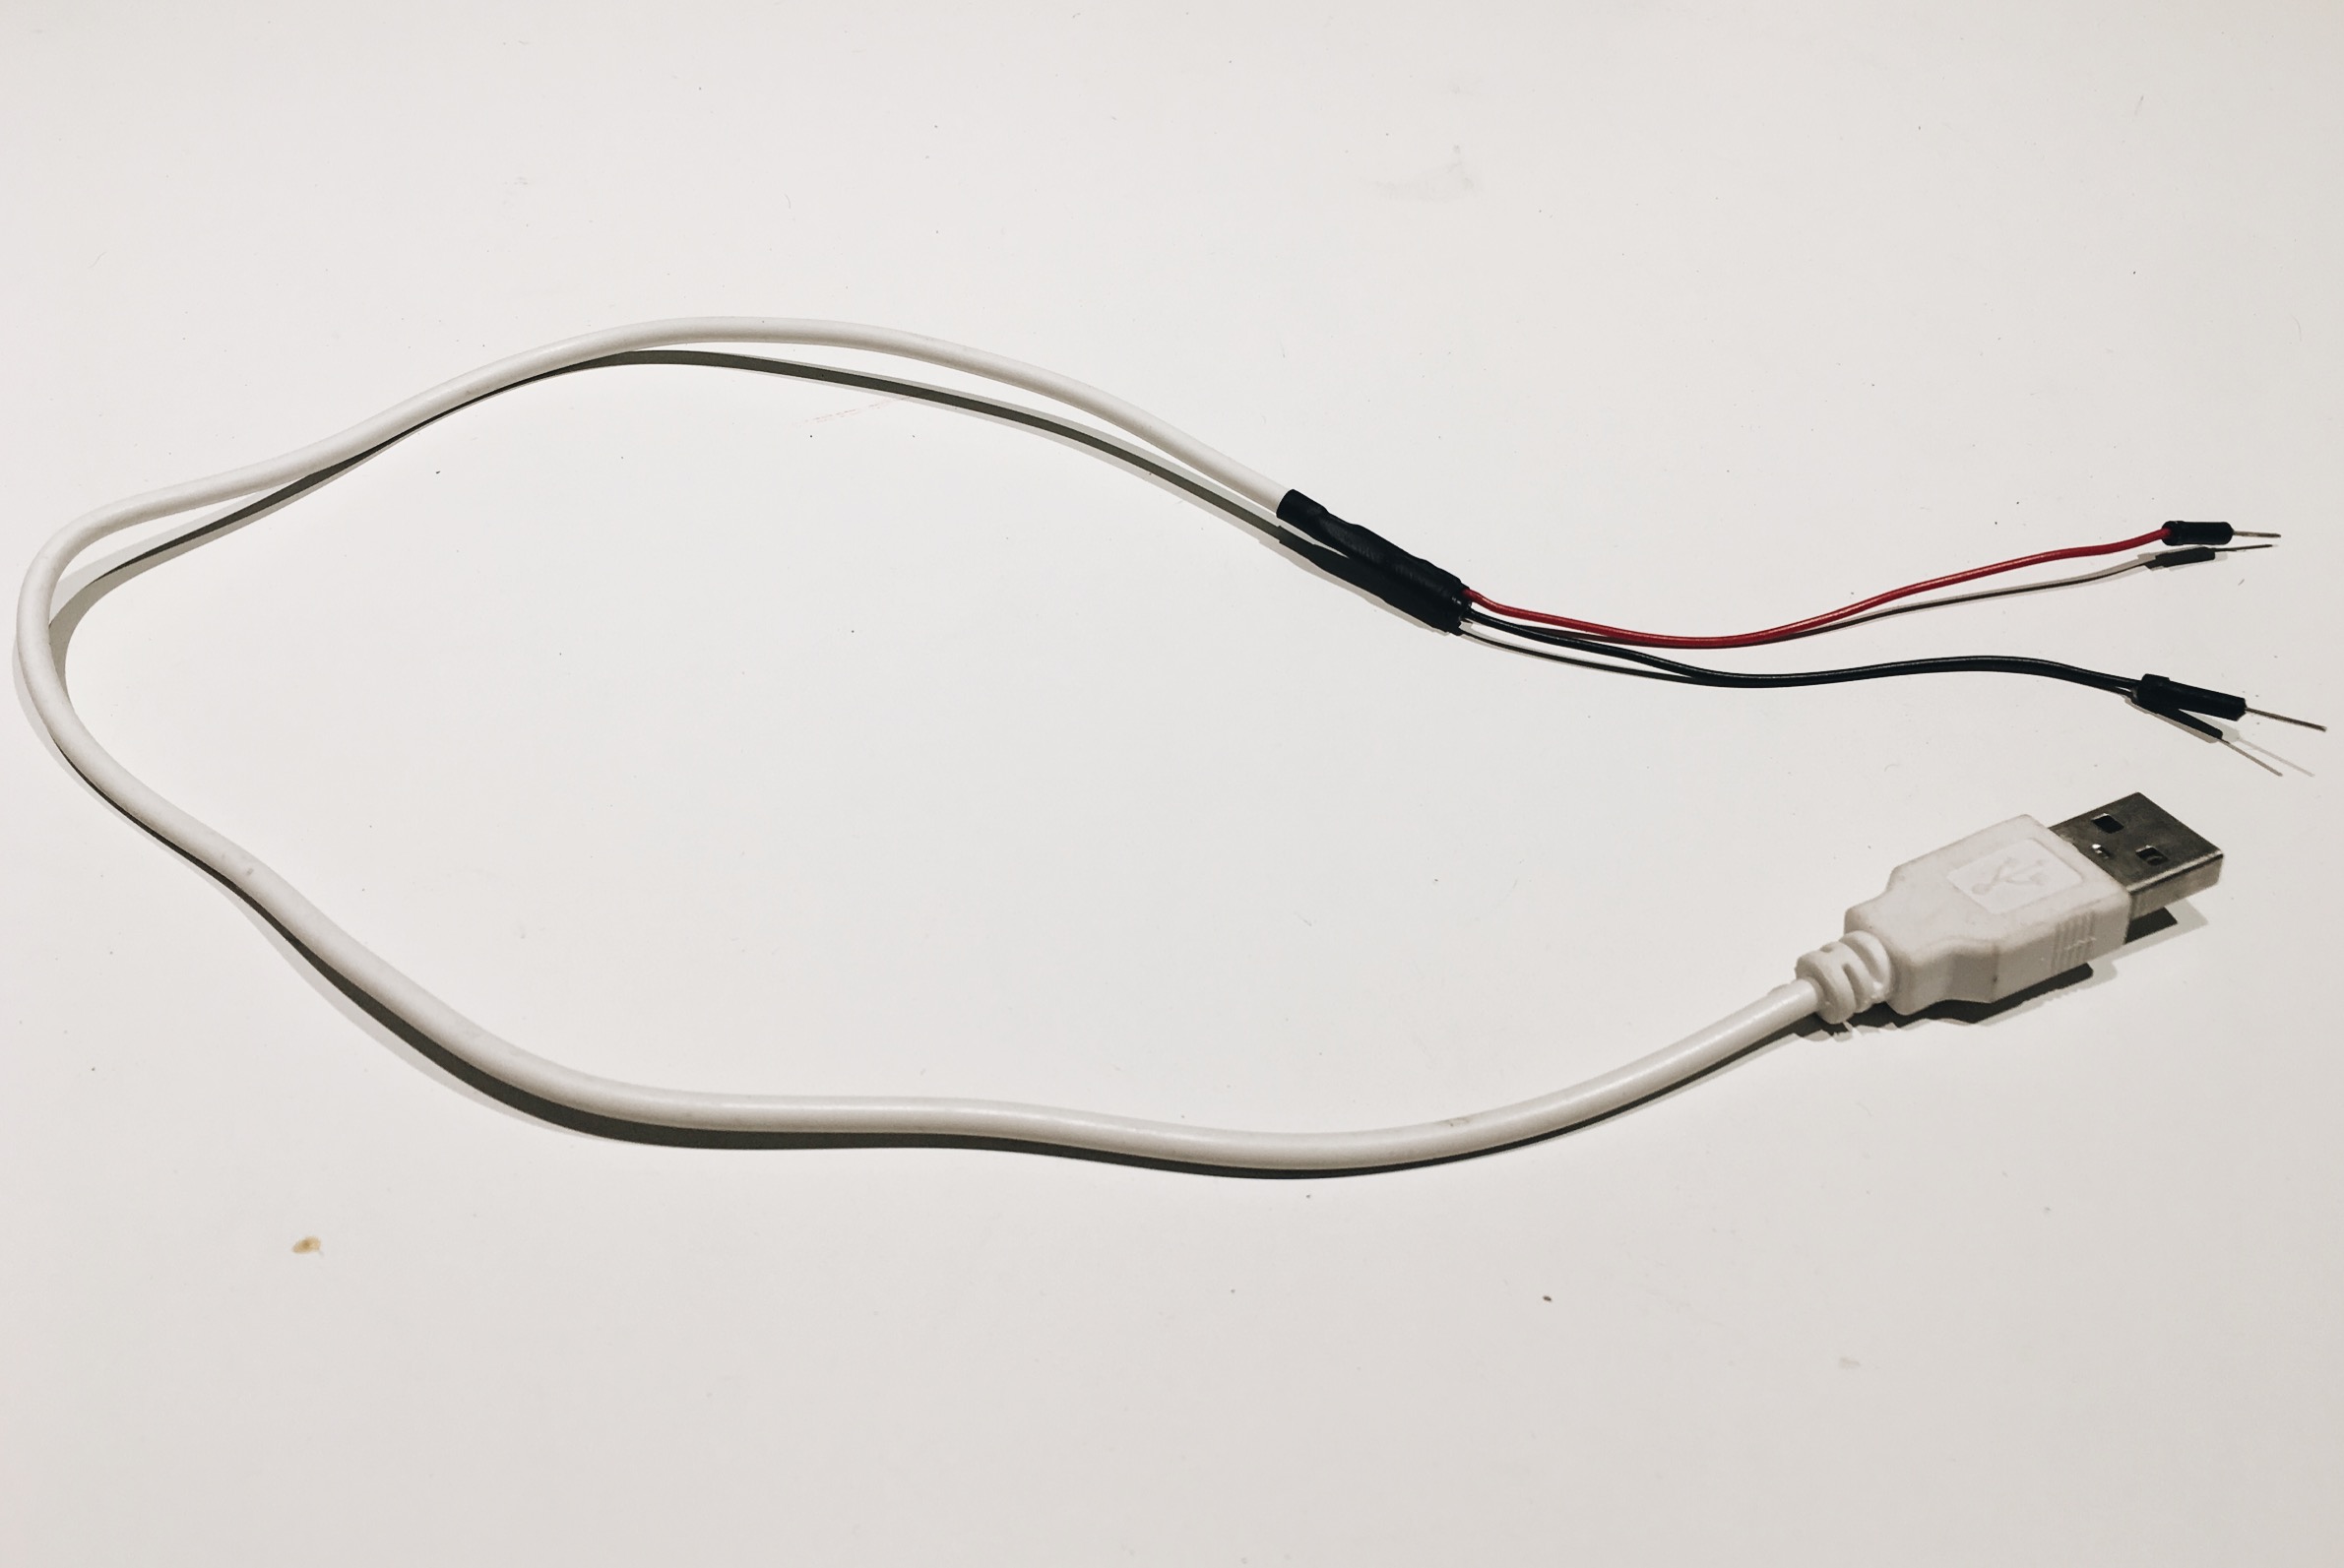 USB cable with stripped wires